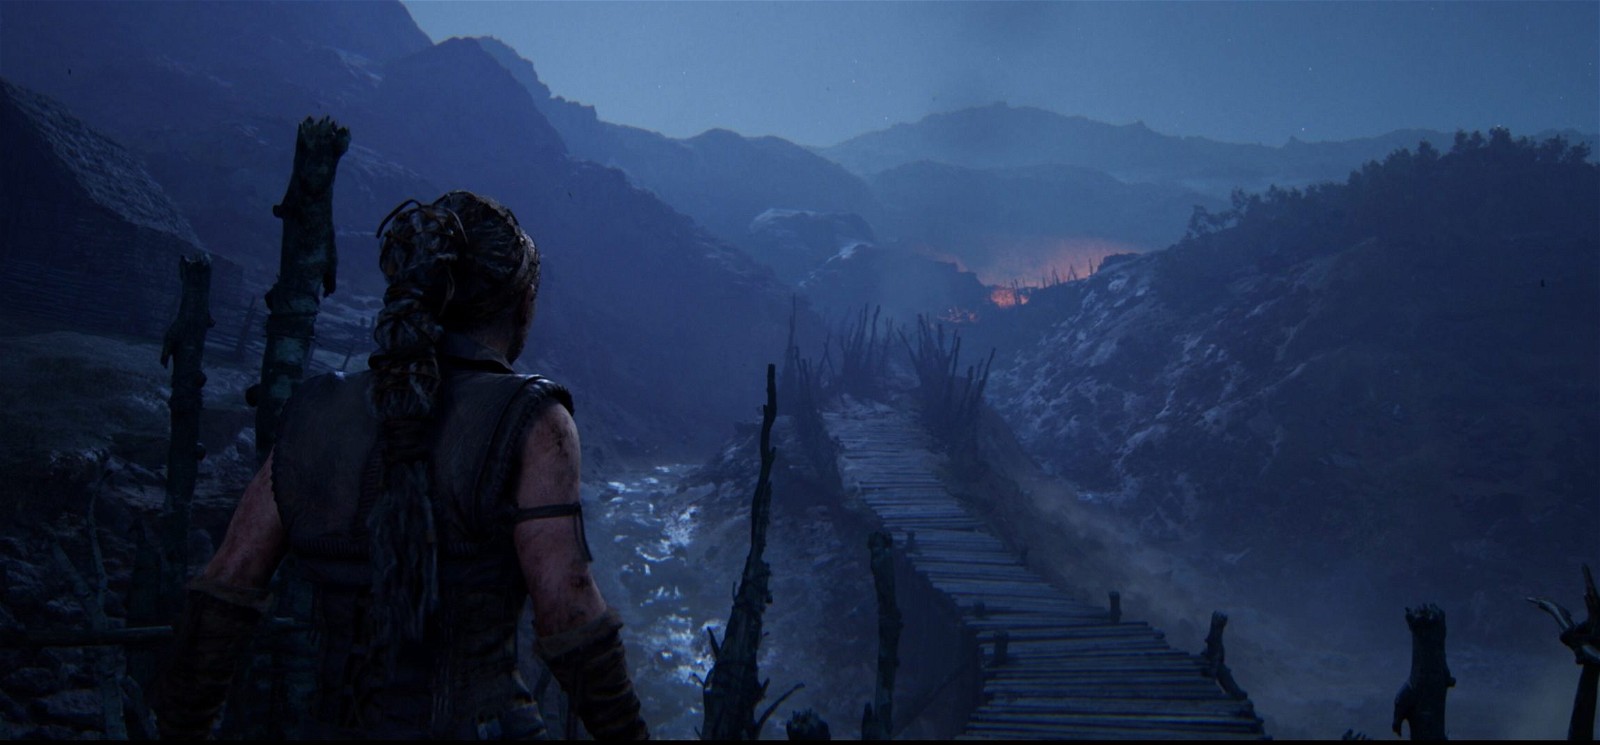 Hellblade 2 graphics is ready to raise the bar